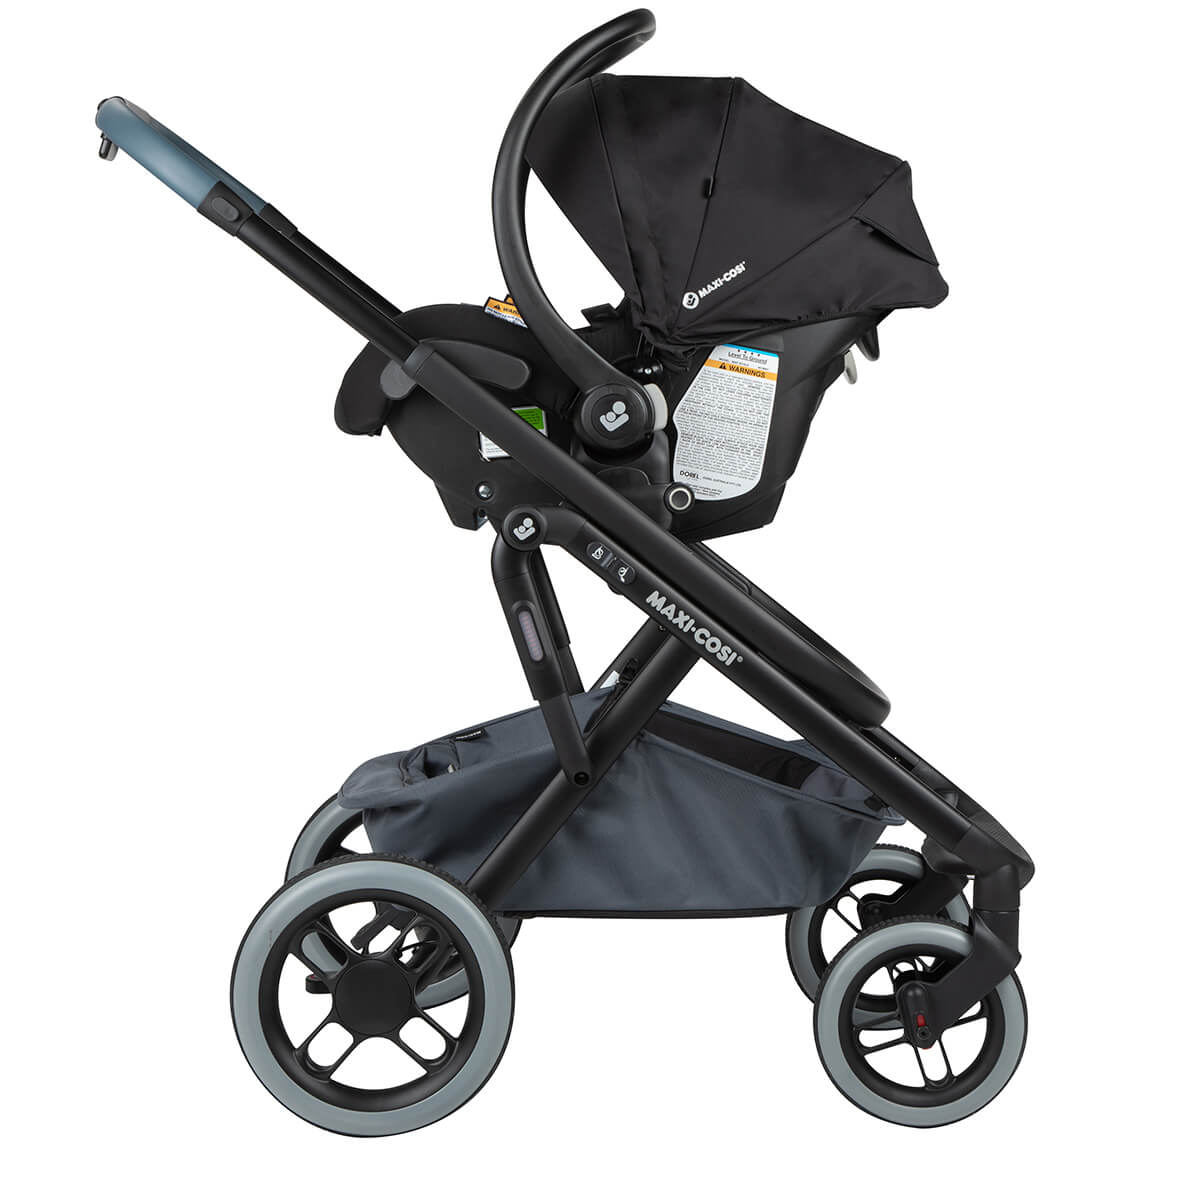 Travel system compatible